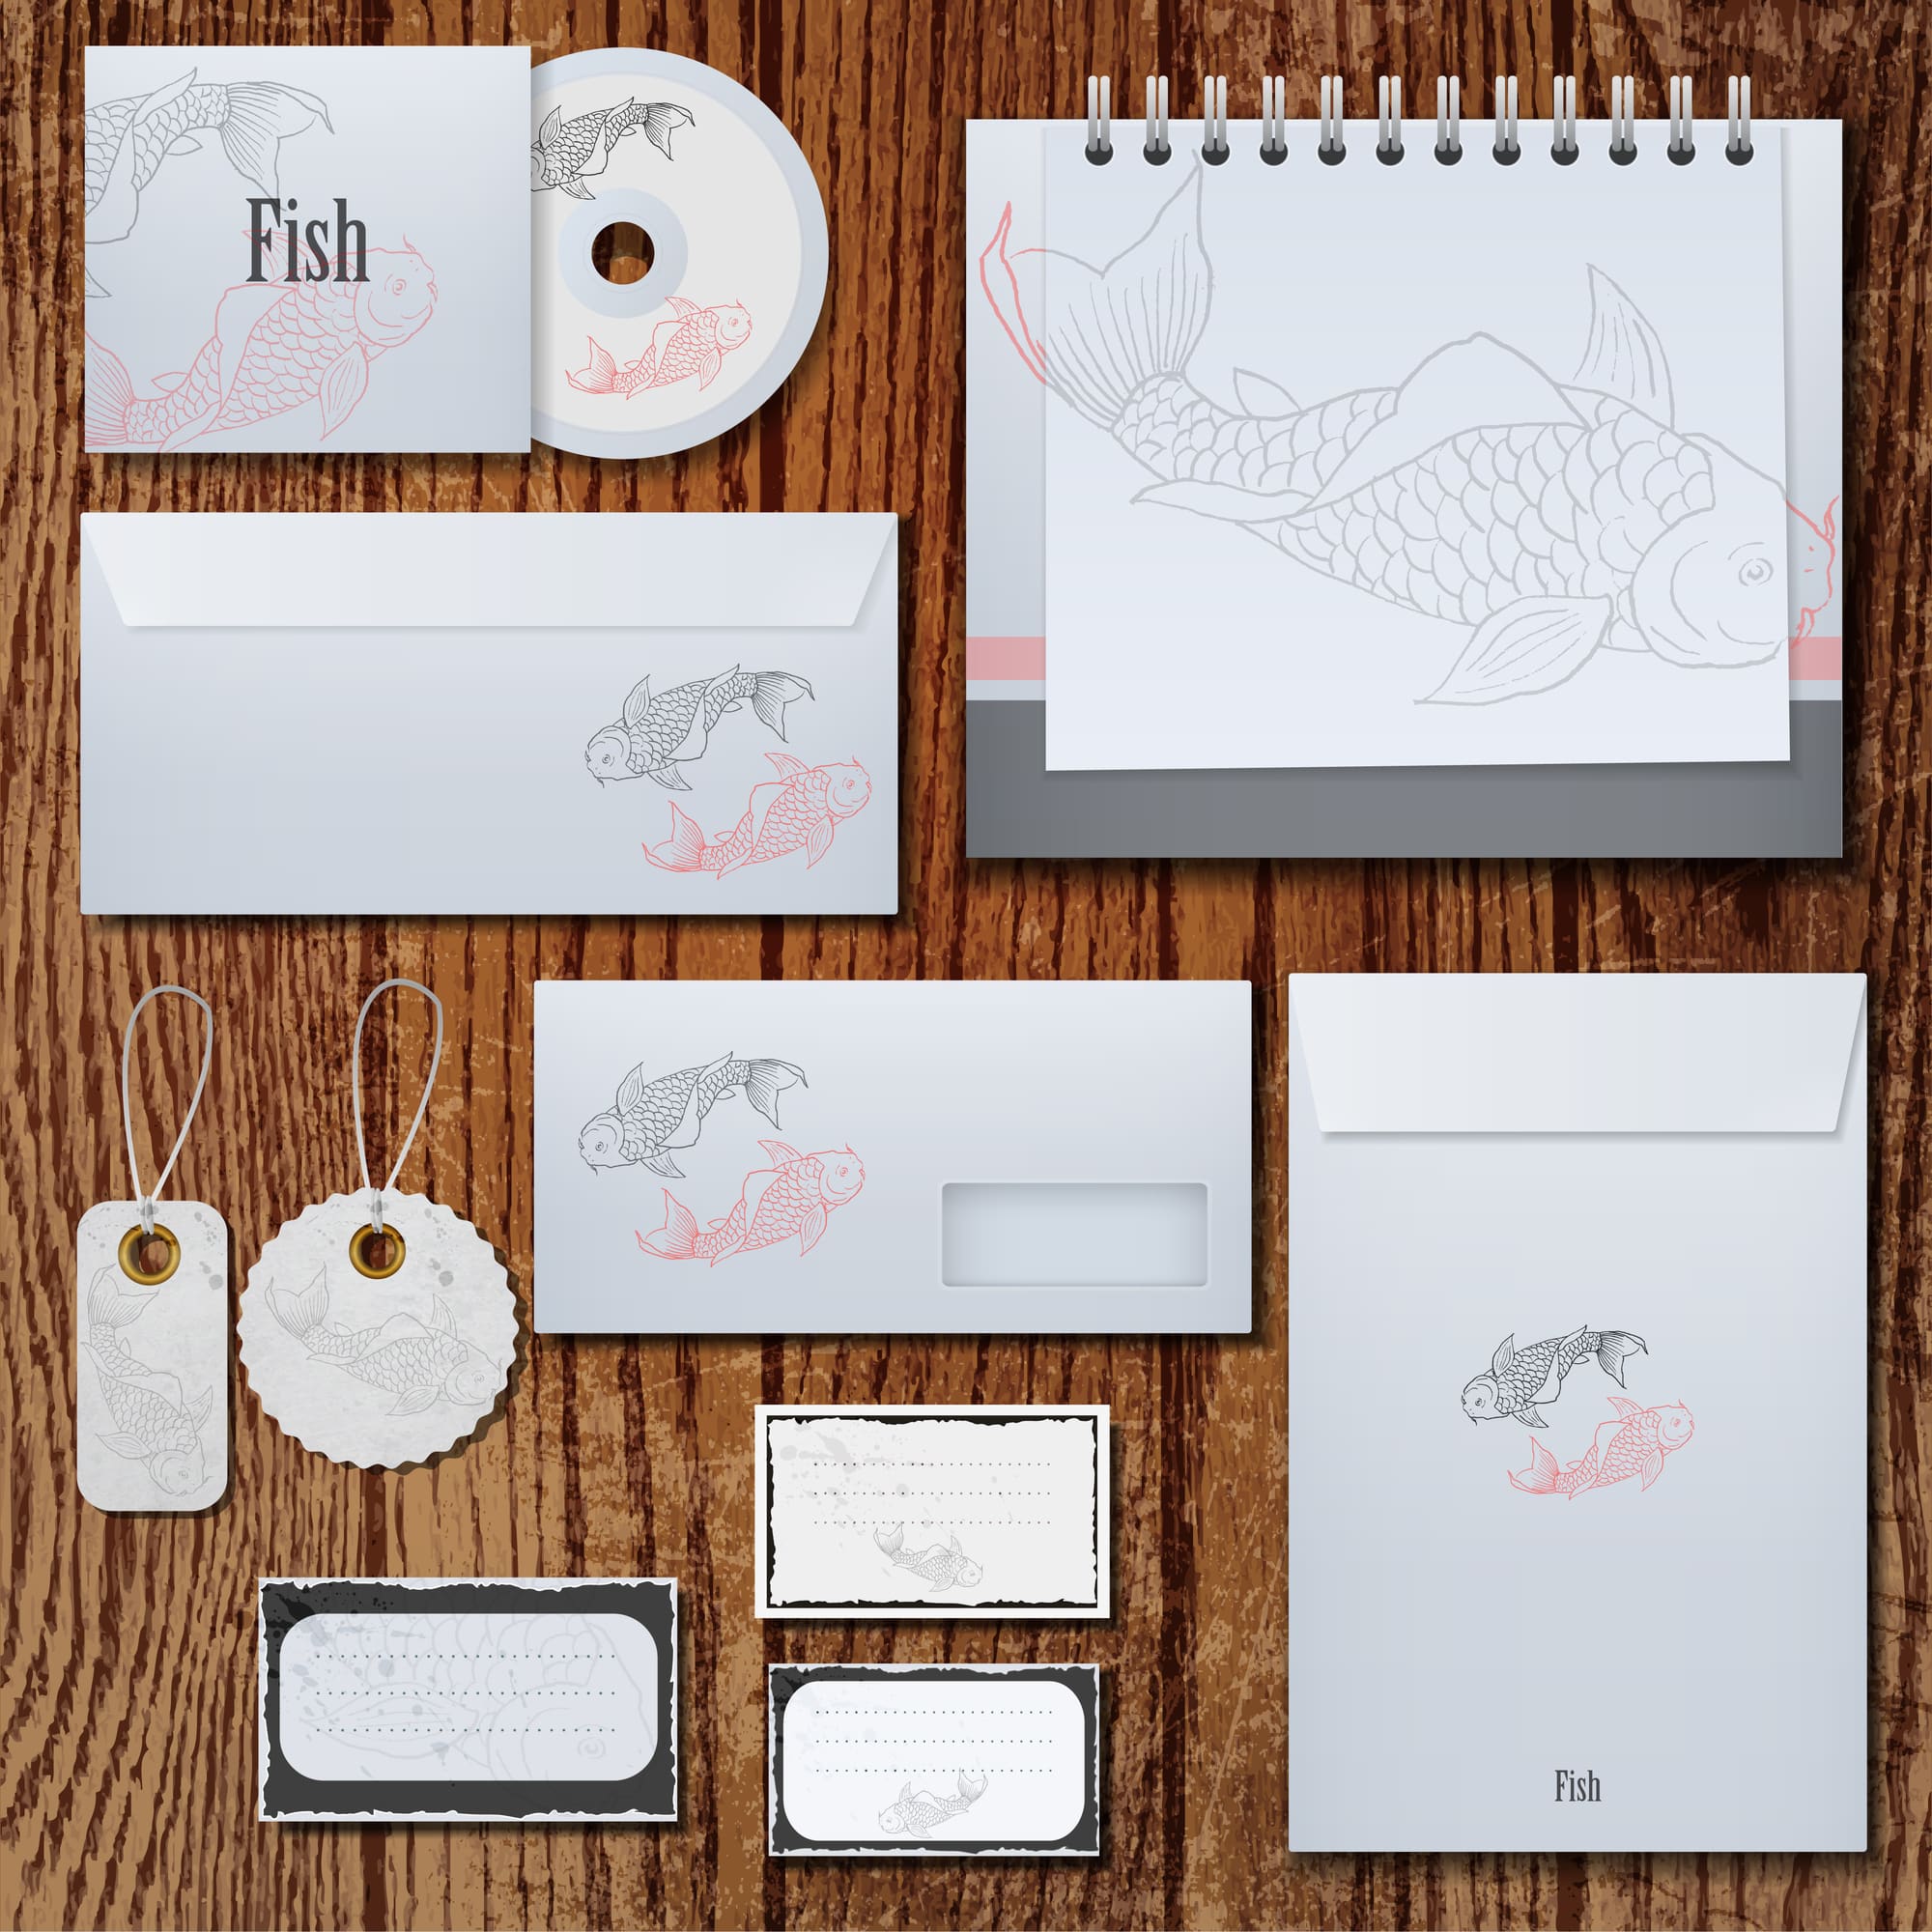 stock-photo-of-business-stationery-with-fish-illustration